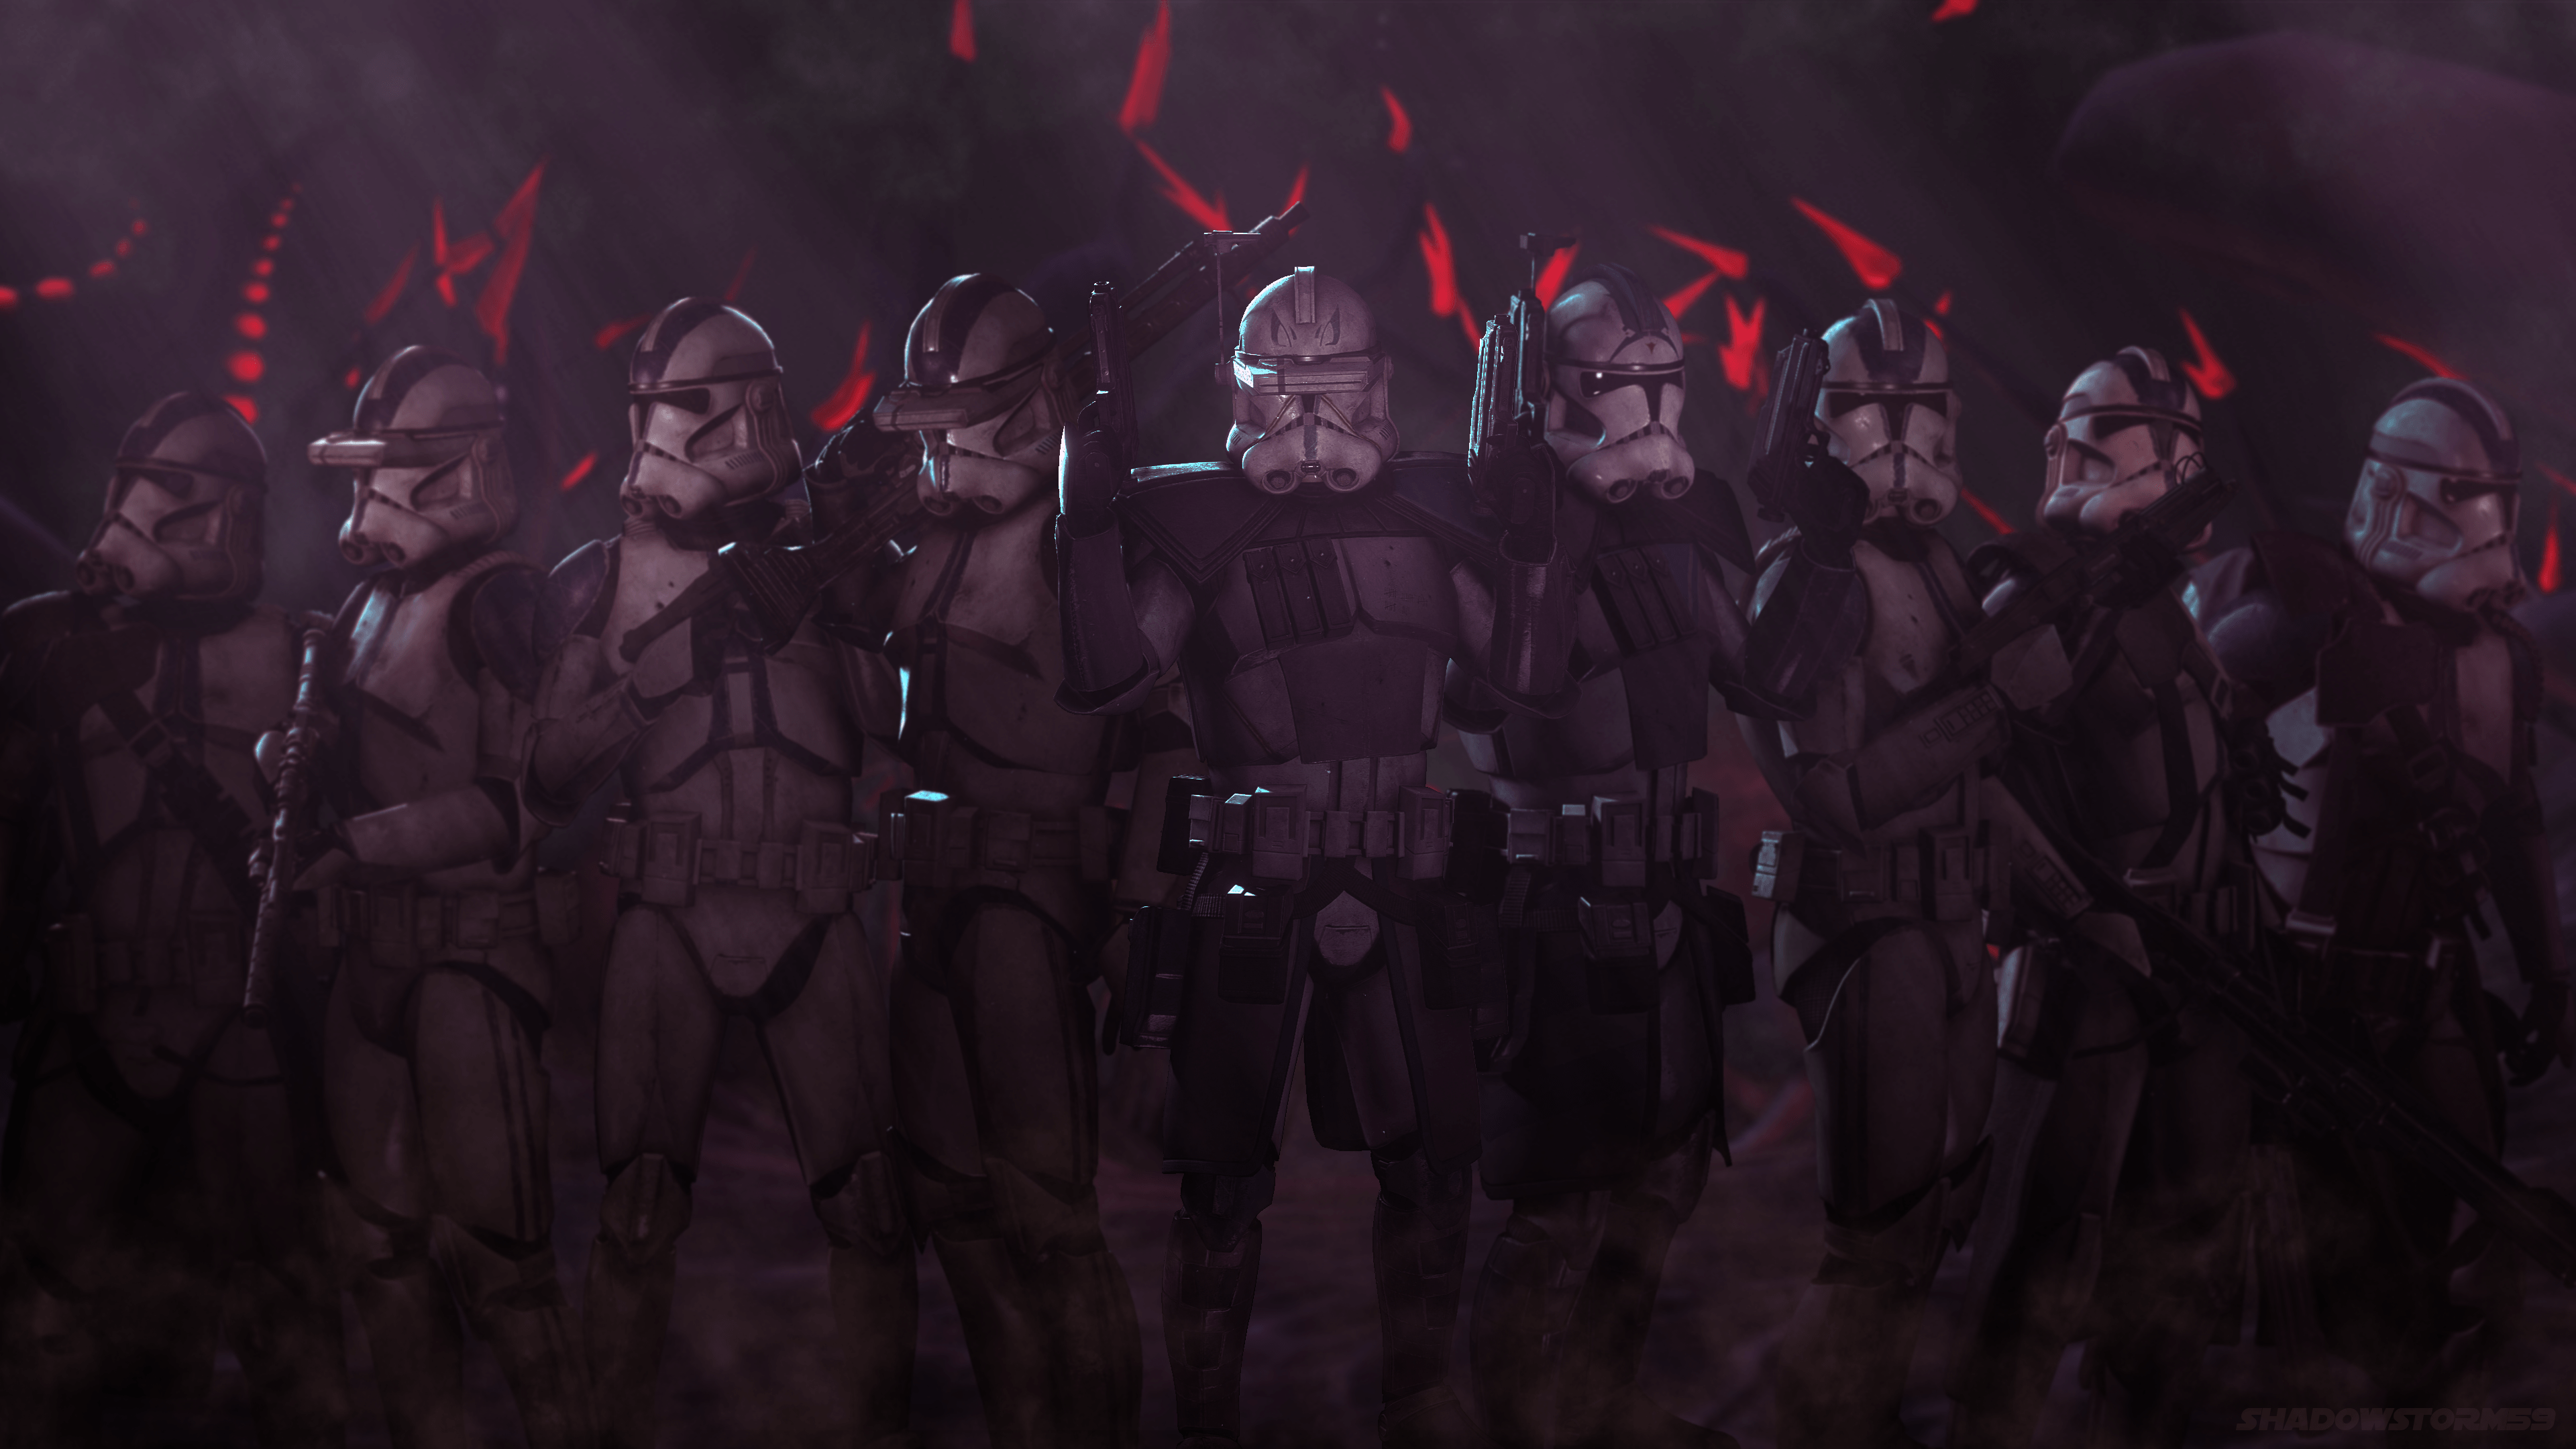 They forged the empire, The 501st legion wallpaper in 4k